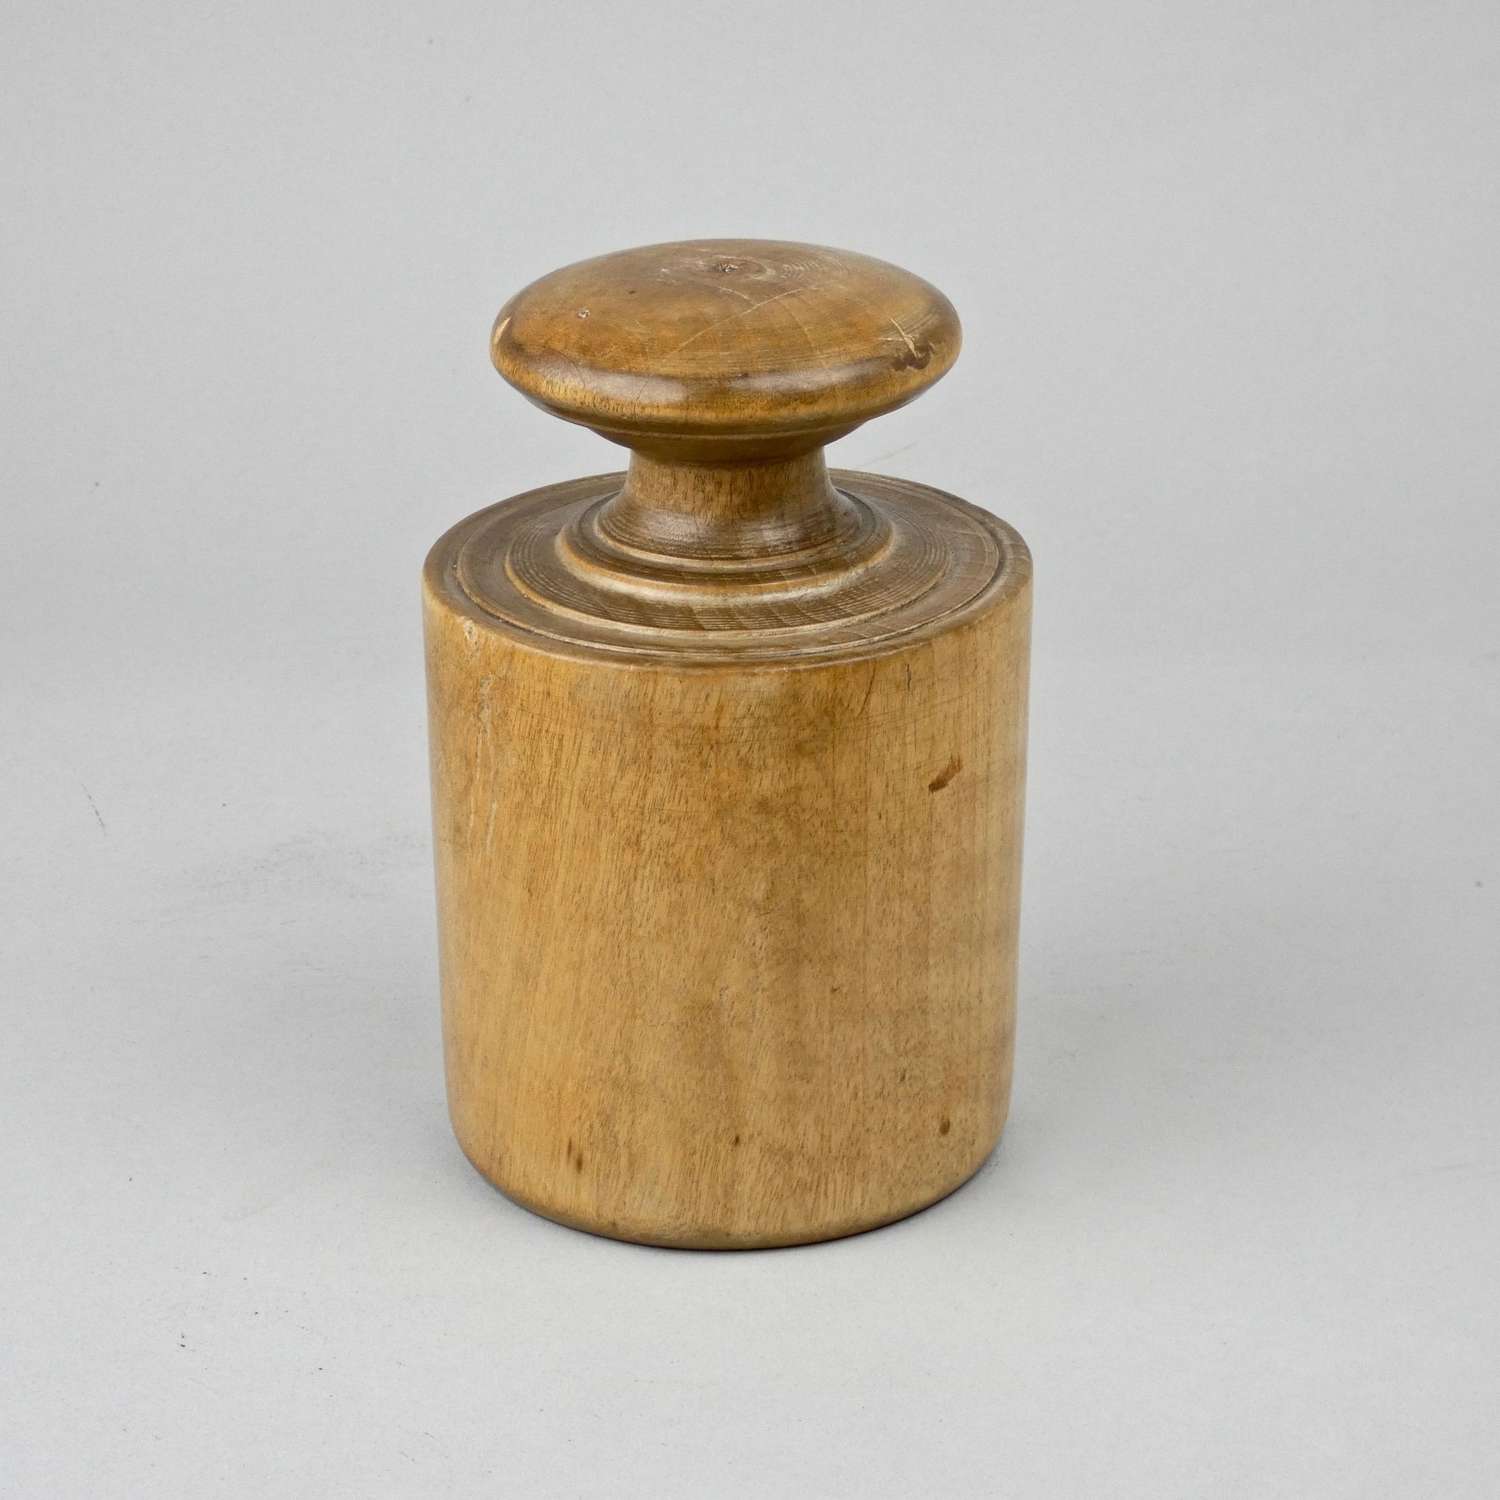 19th century wooden pie mould